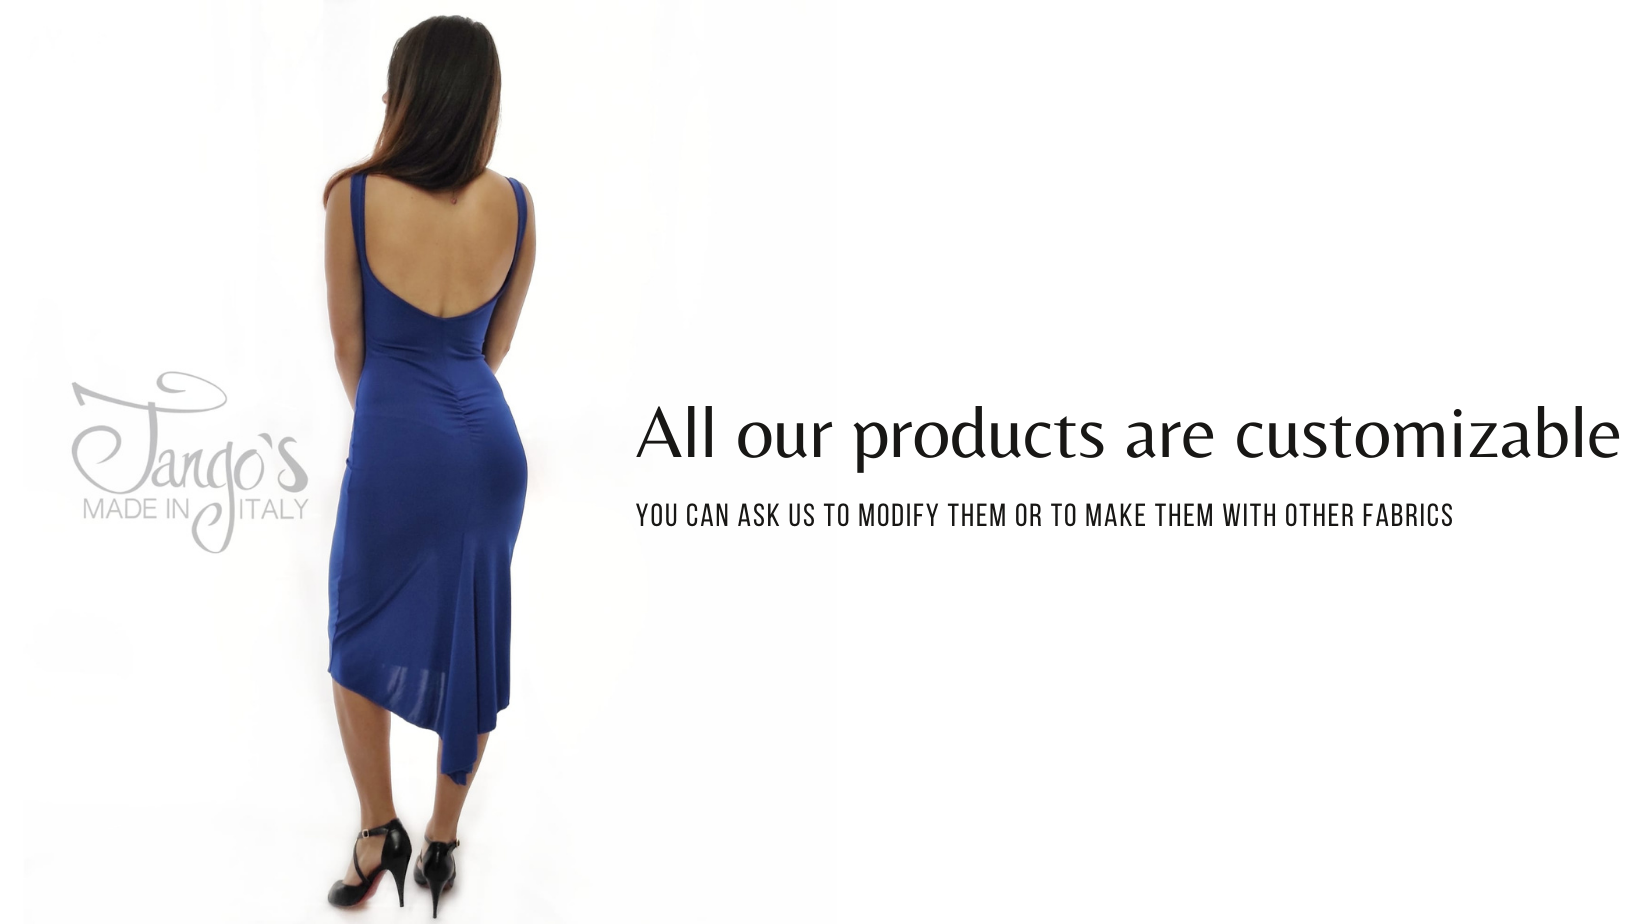 All our products are customizable